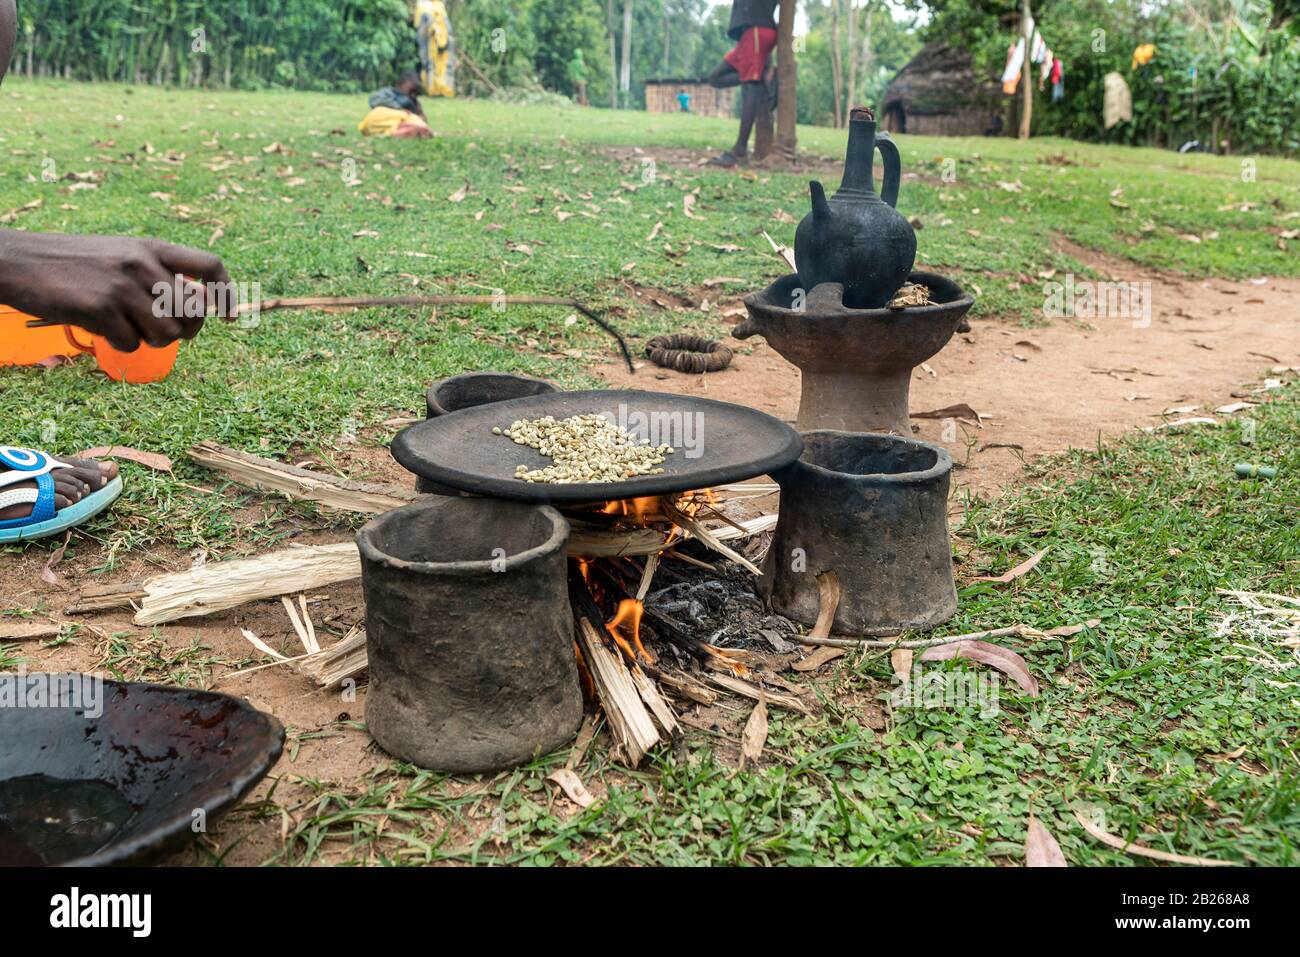 Roasting of green immature coffee beans on a flat pan in a village in southern Ethiopia Stock Photo